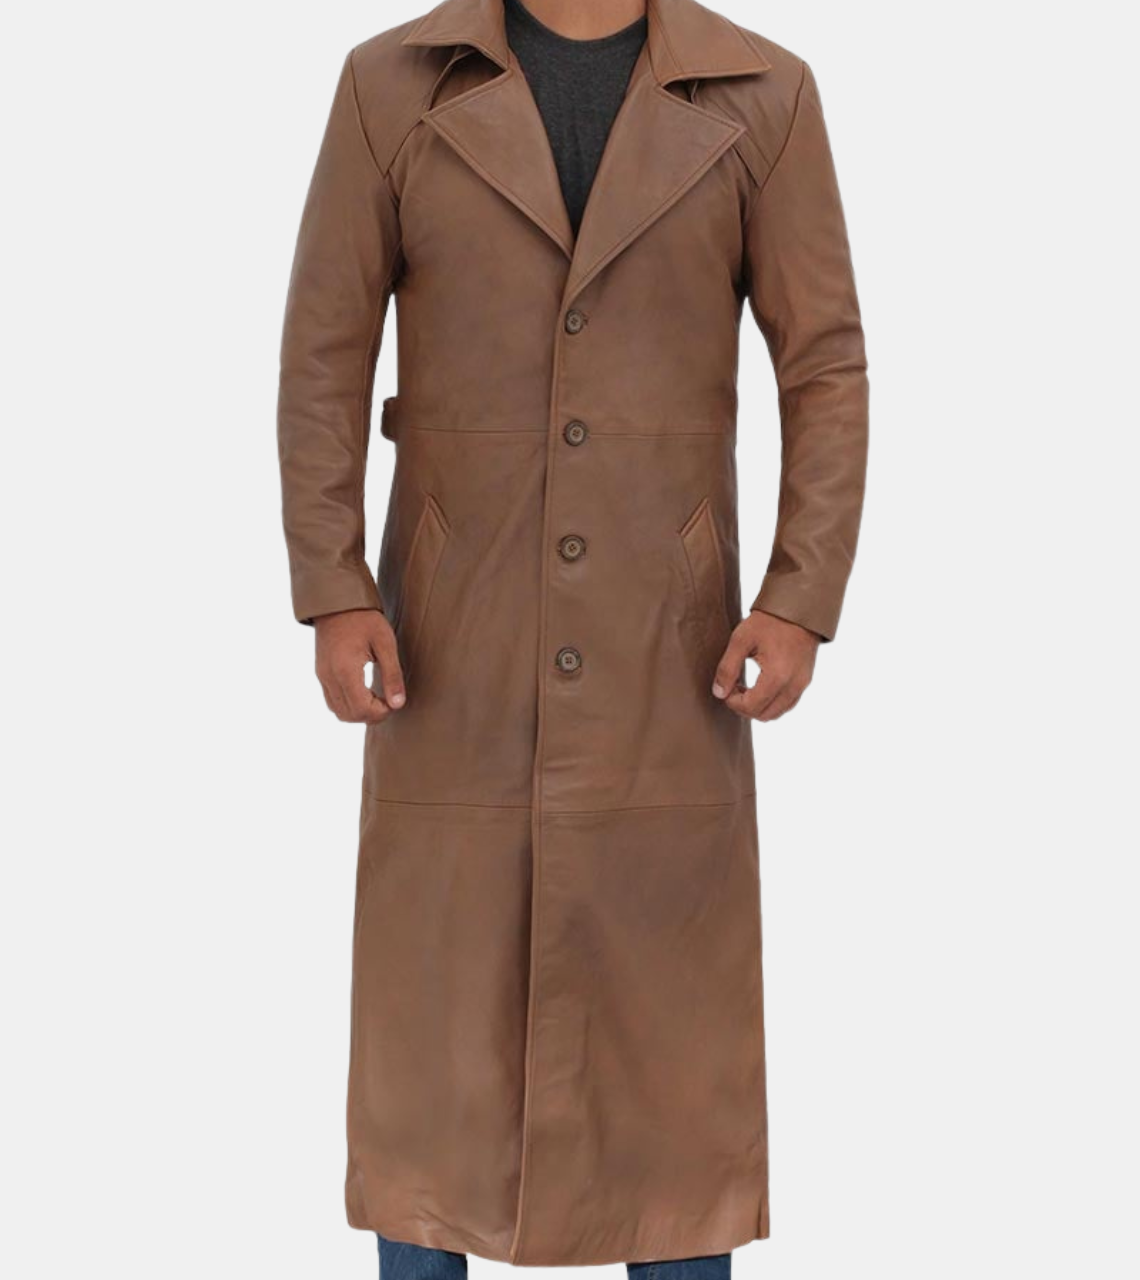 Rier Men's Tan Brown Leather Trench Coat